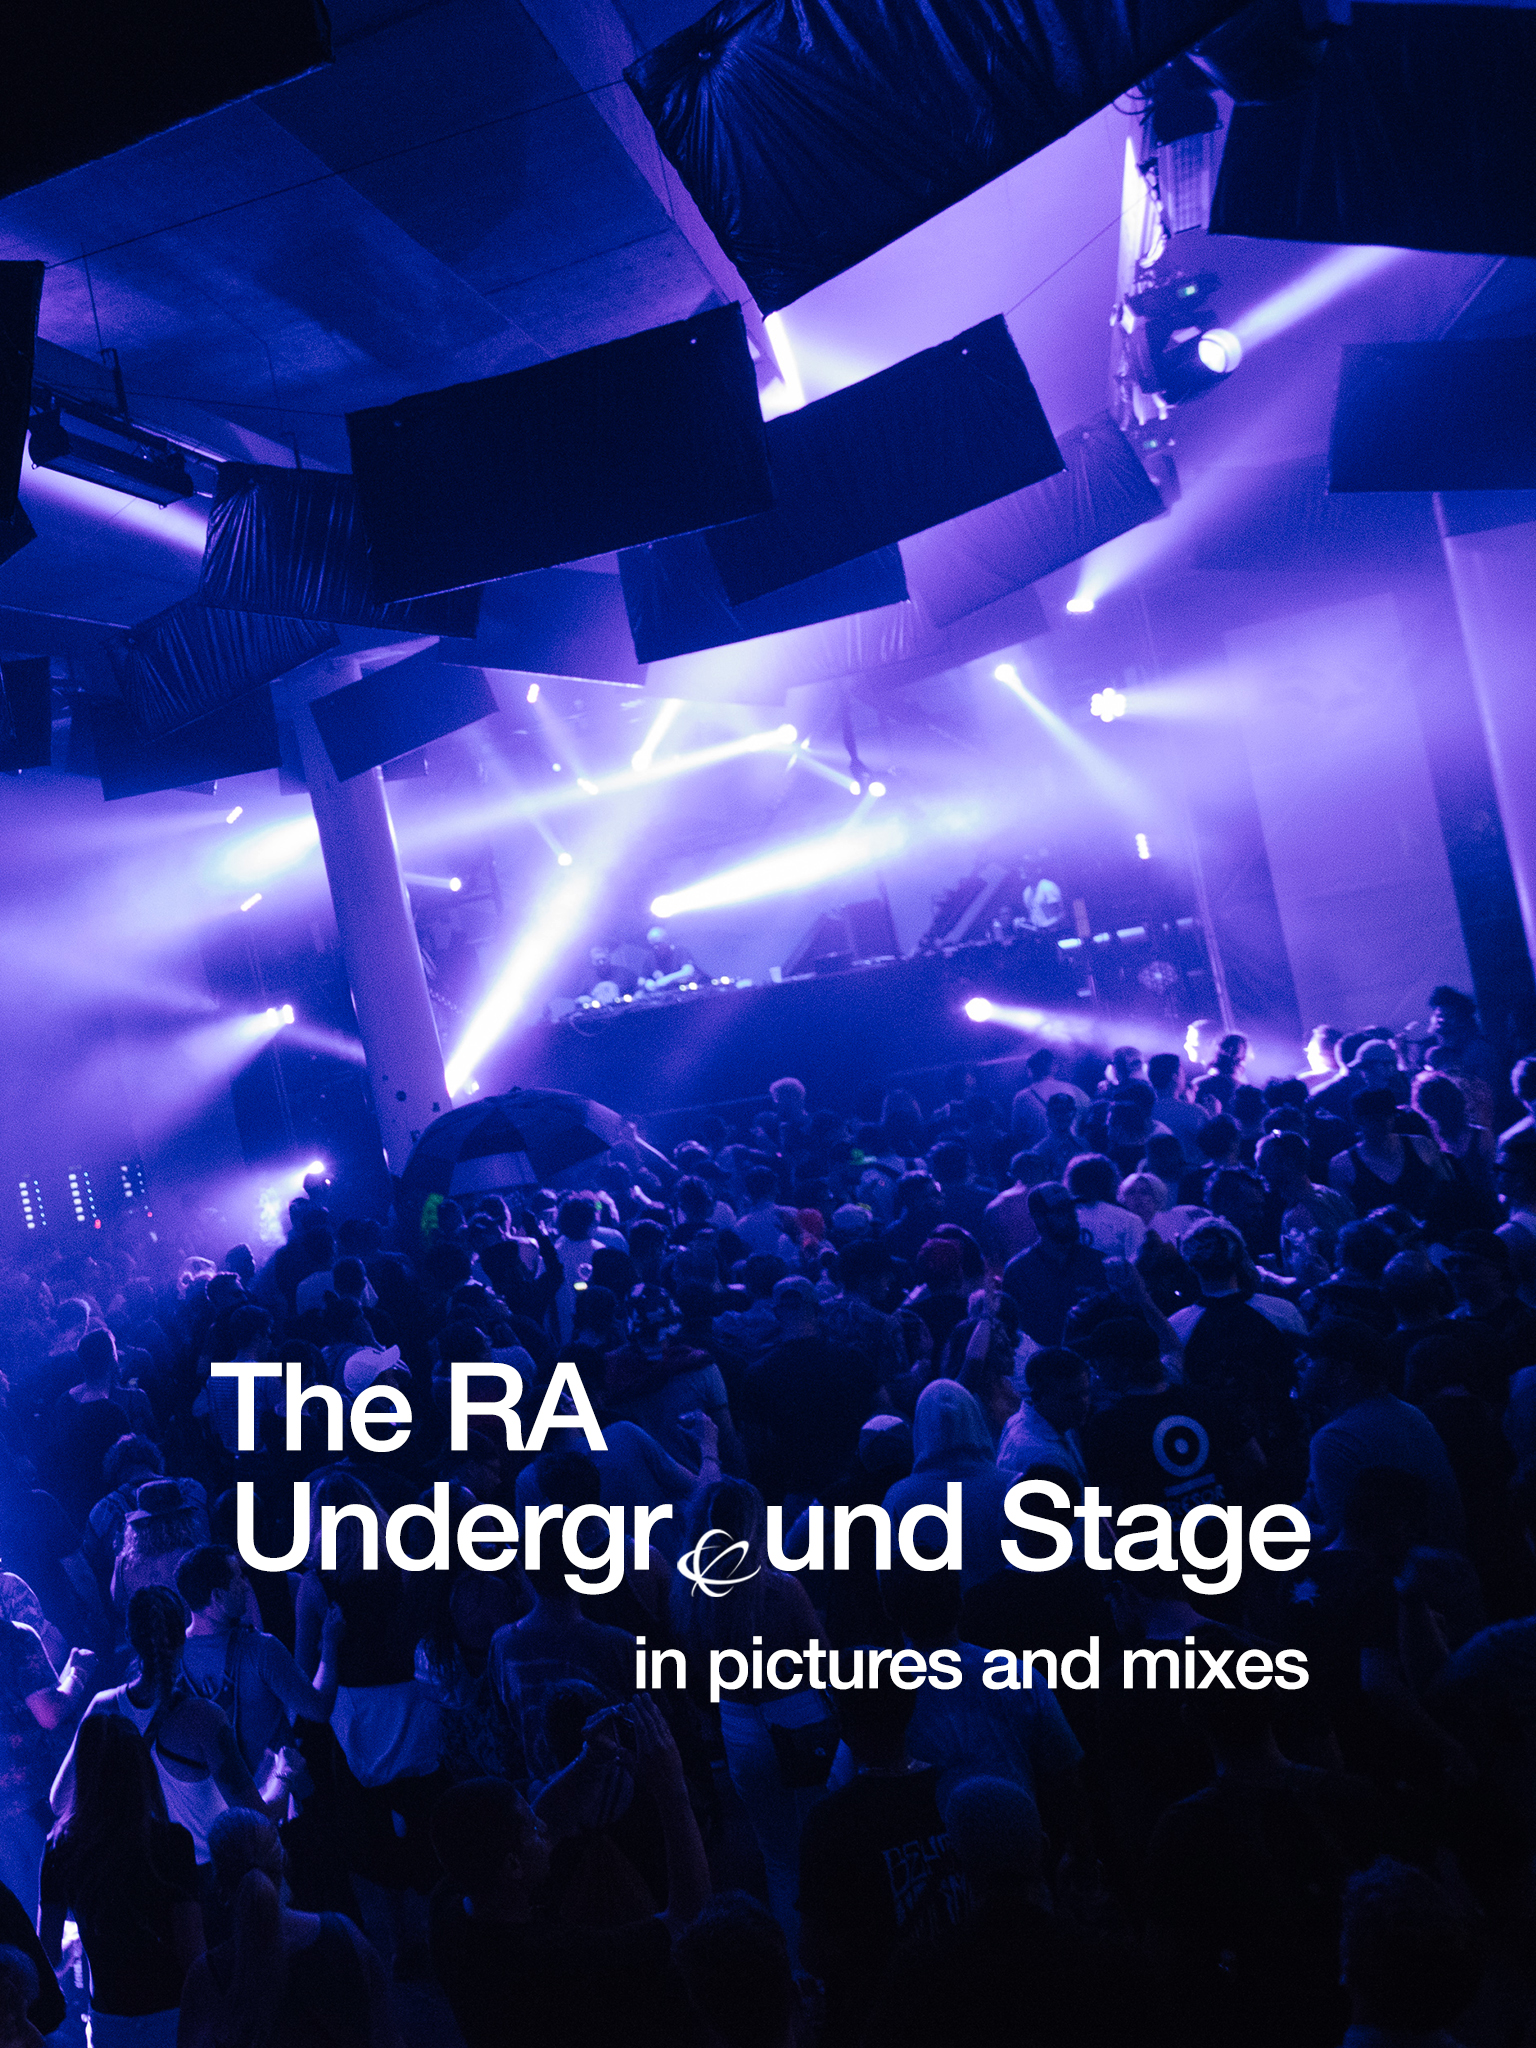 The RA Underground Stage in pictures and mixes